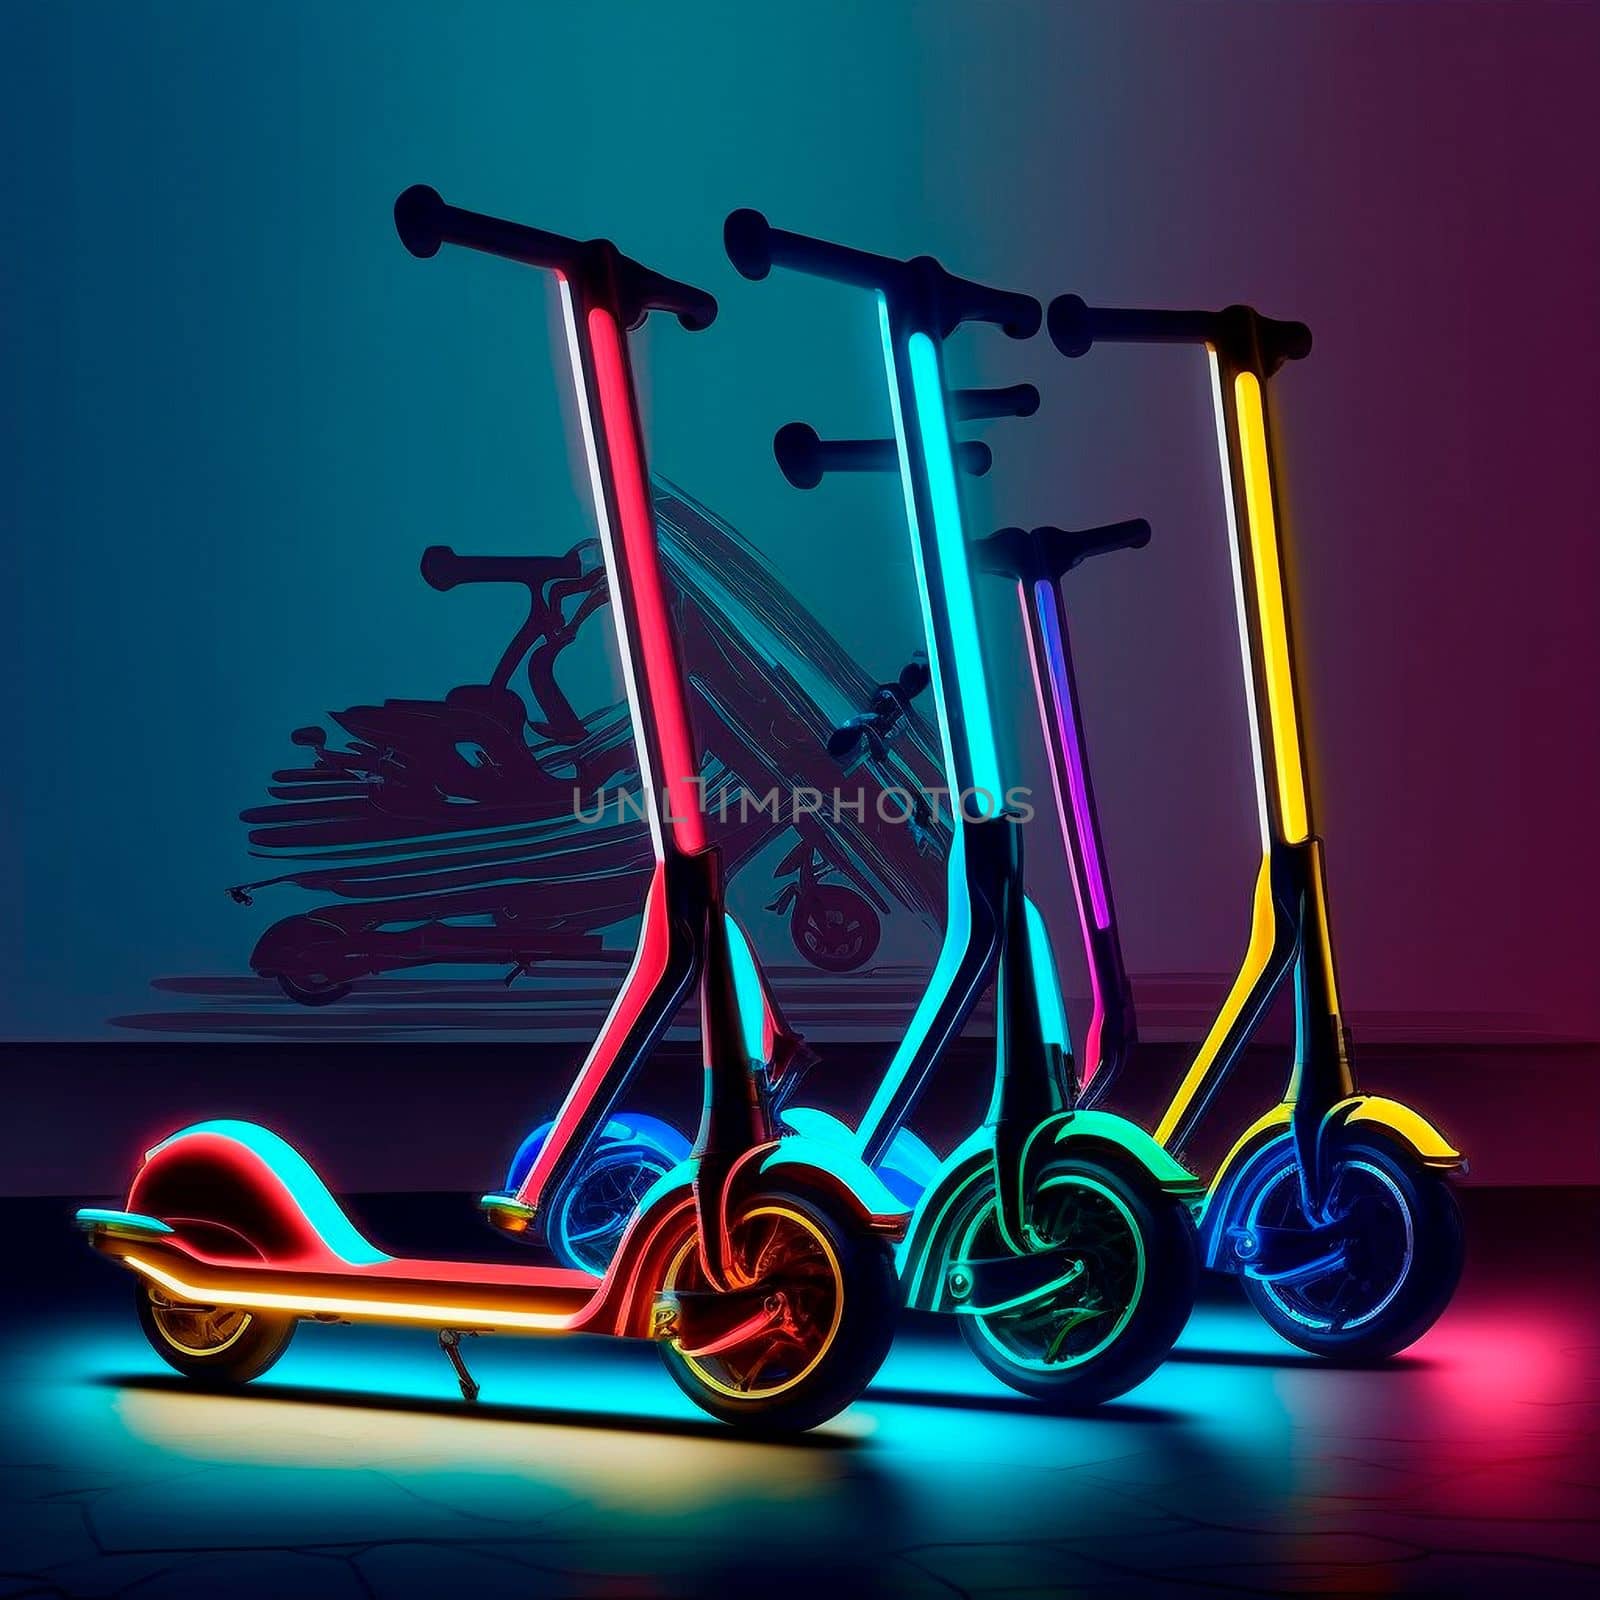 City scooters with neon lights by NeuroSky